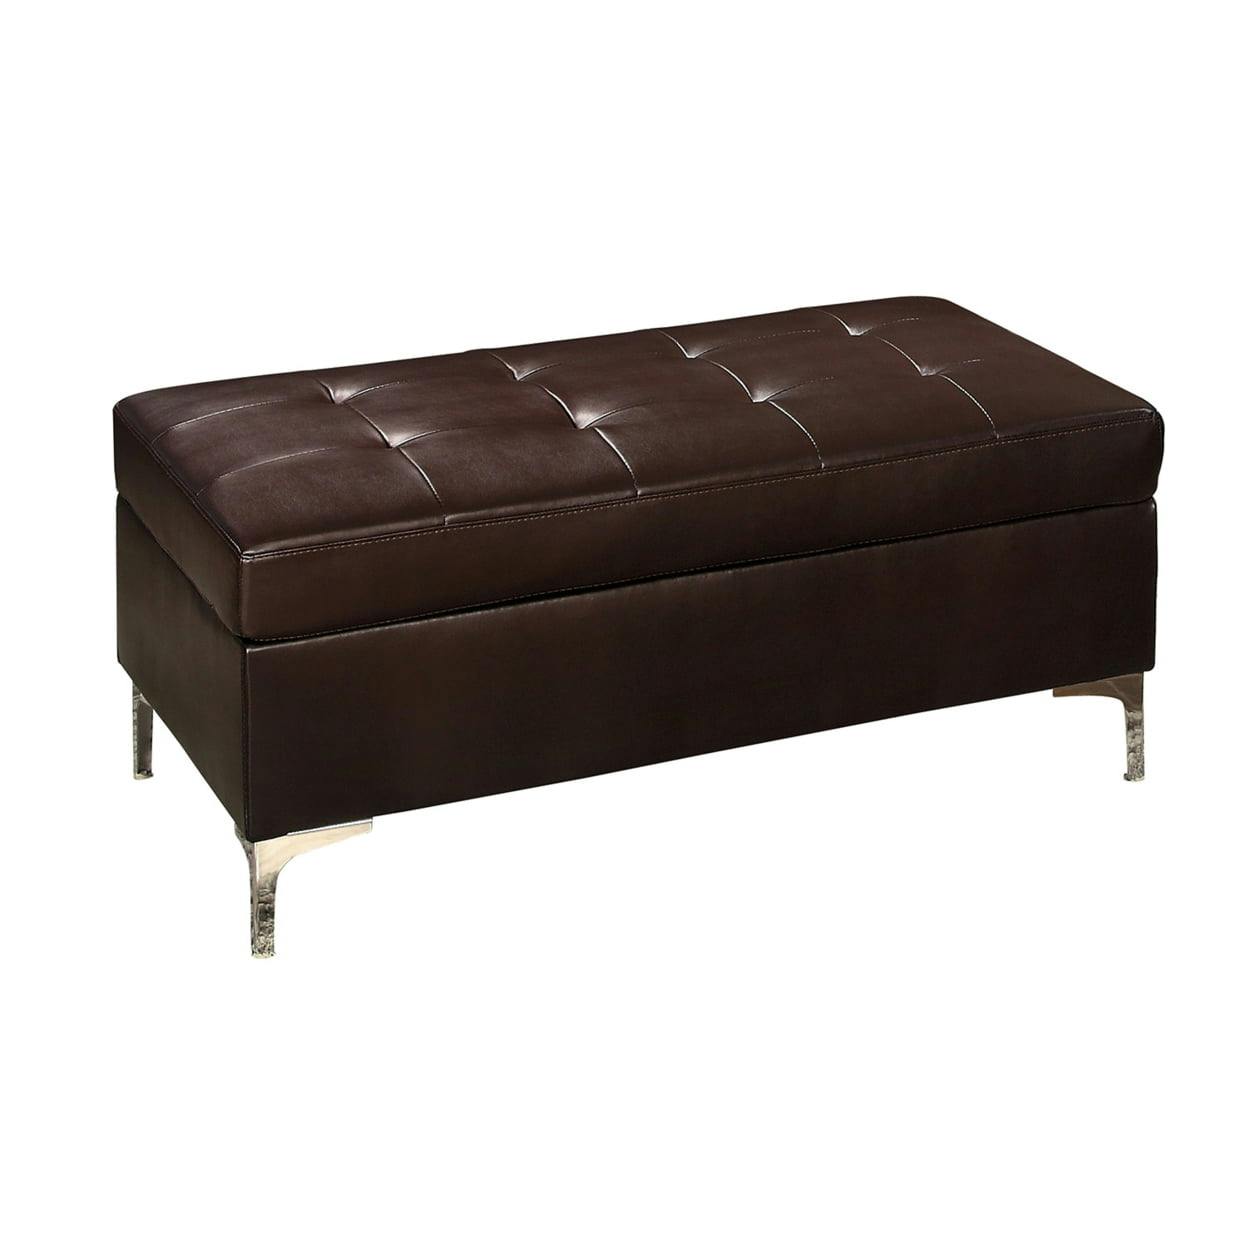 Contemporary Brown Tufted Leather Ottoman, 45"x25"